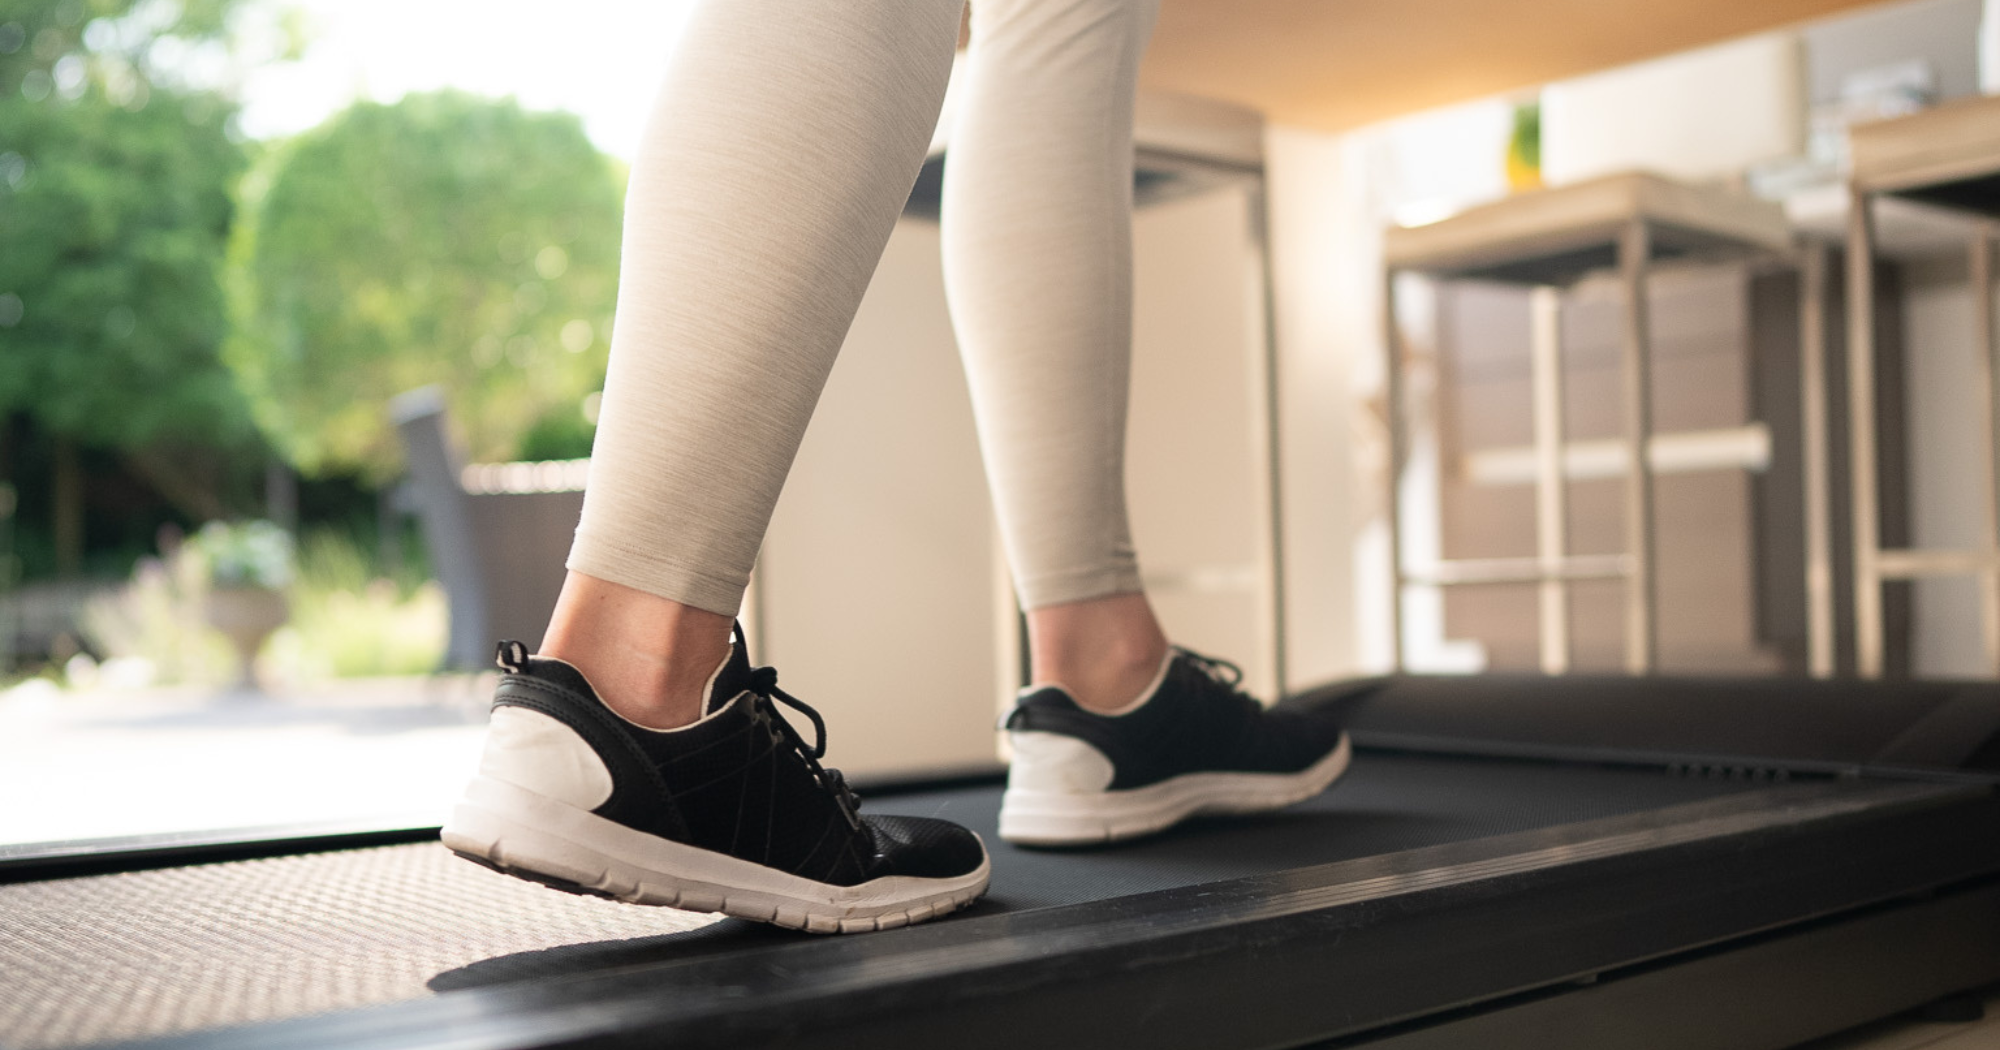 Can a Walking Pad Help You Lose Weight? A woman using a walking pad in her home.